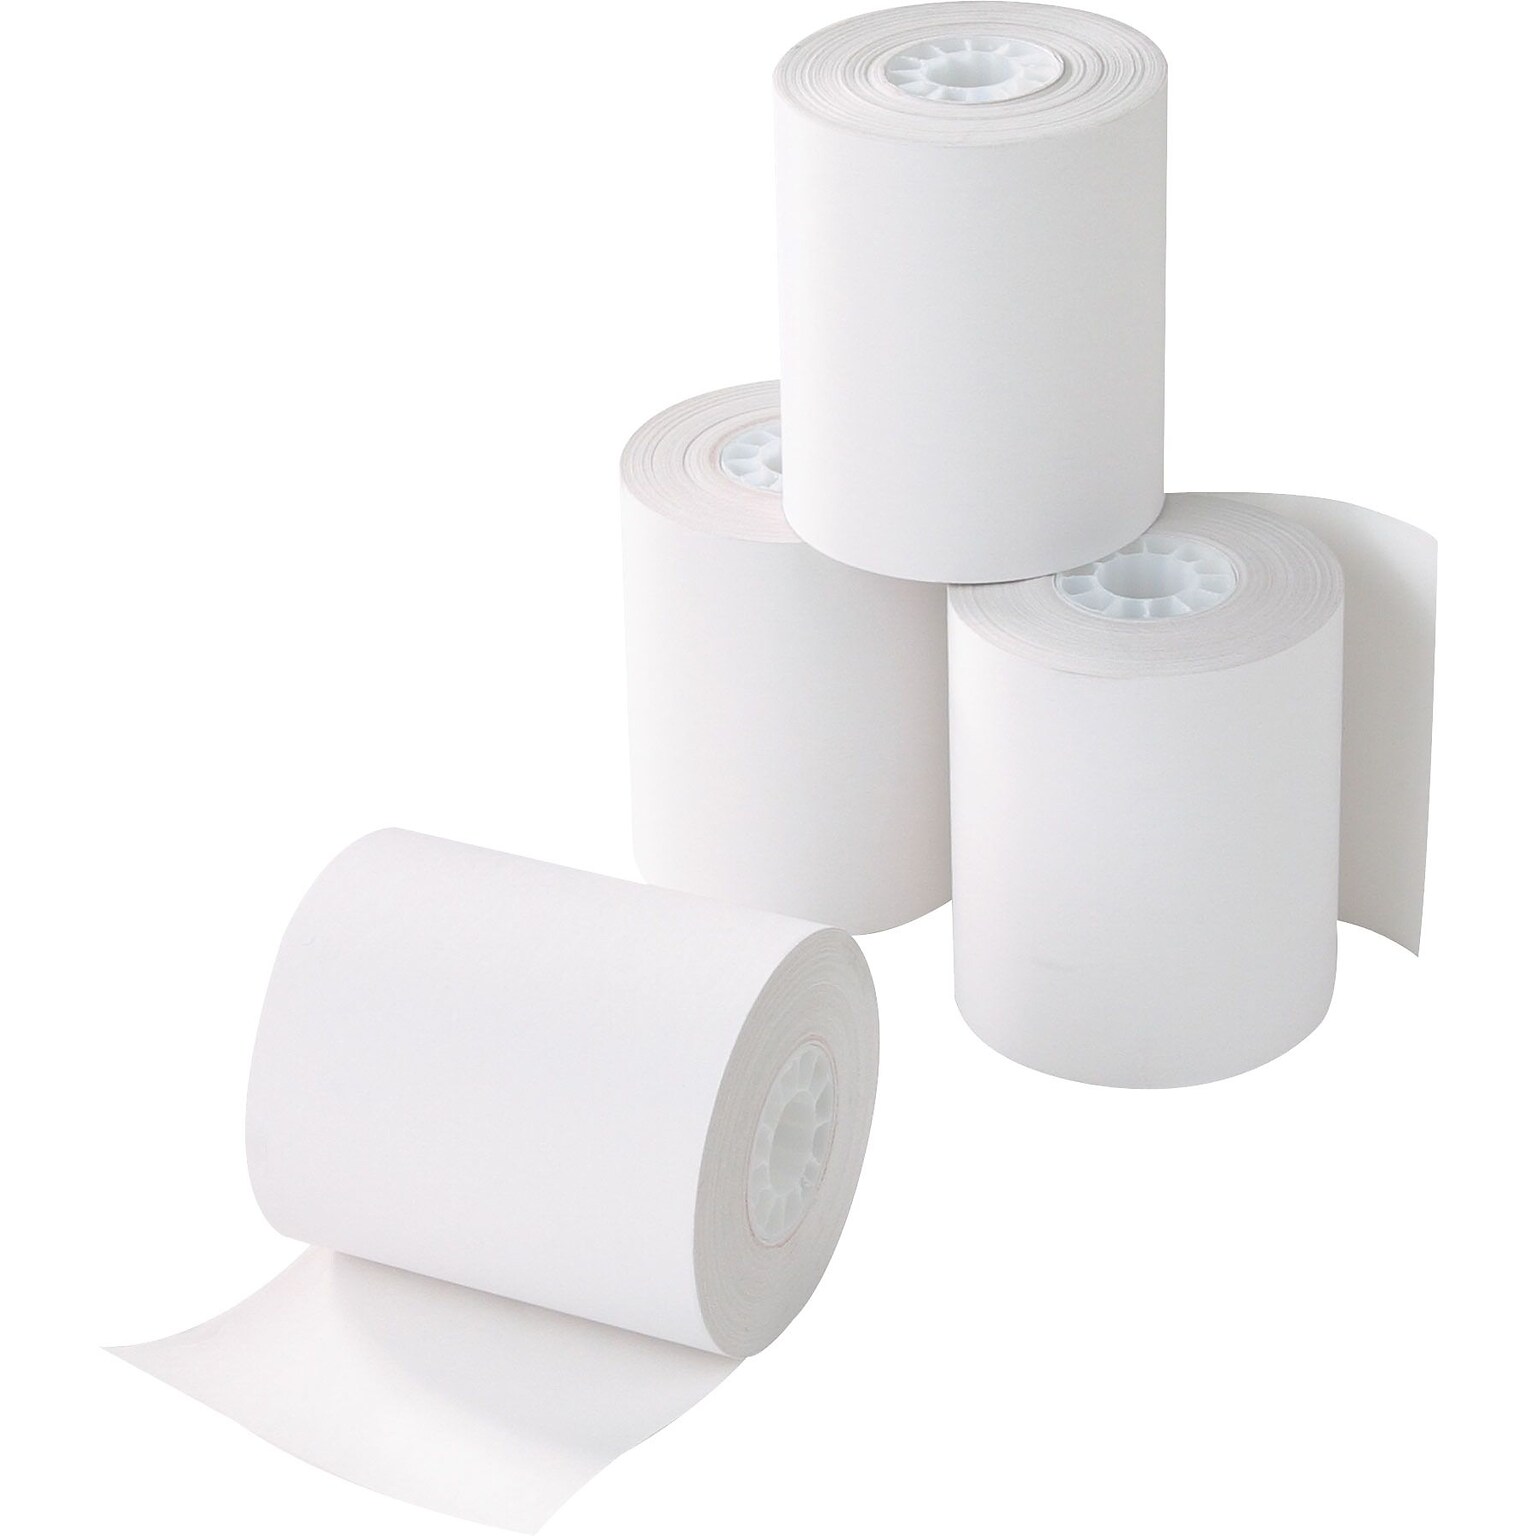 Alliance Thermal ATM Paper Rolls, 2 3/4 x 850, BPA Free, 8 Rolls/Pack (3166)